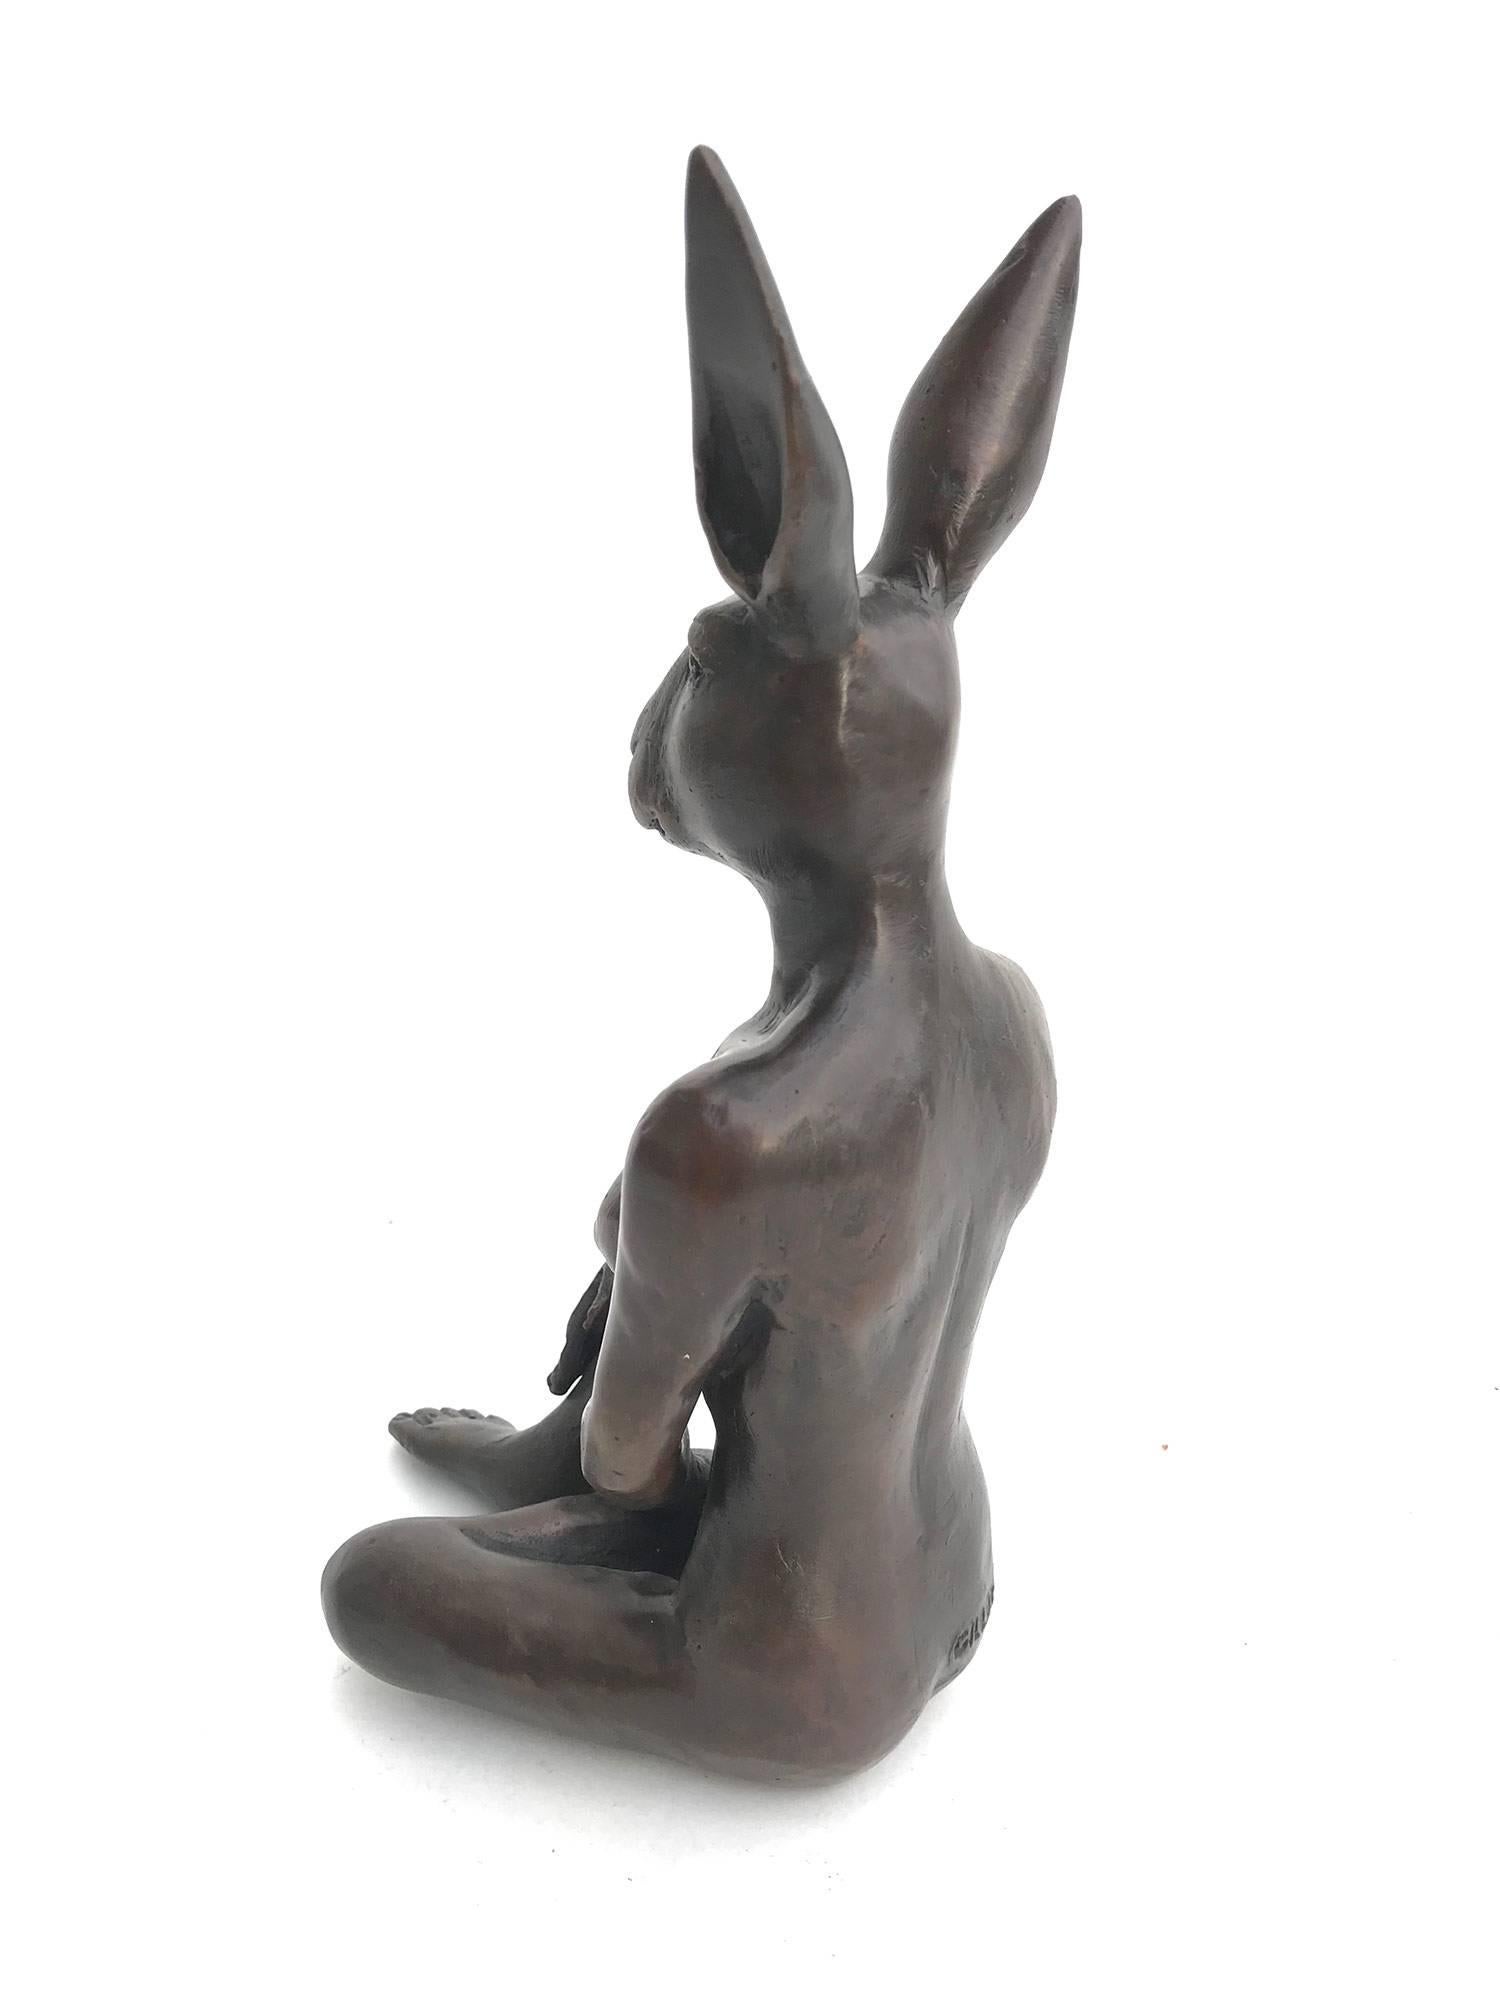 A whimsical yet very strong piece depicting the iconic figure Rabbit from Gillie and Marc's of the Dog/Bunny Human Hybrid, which has picked up much esteem across the globe. Here we find her sitting in a very sophisticated and comfortable position